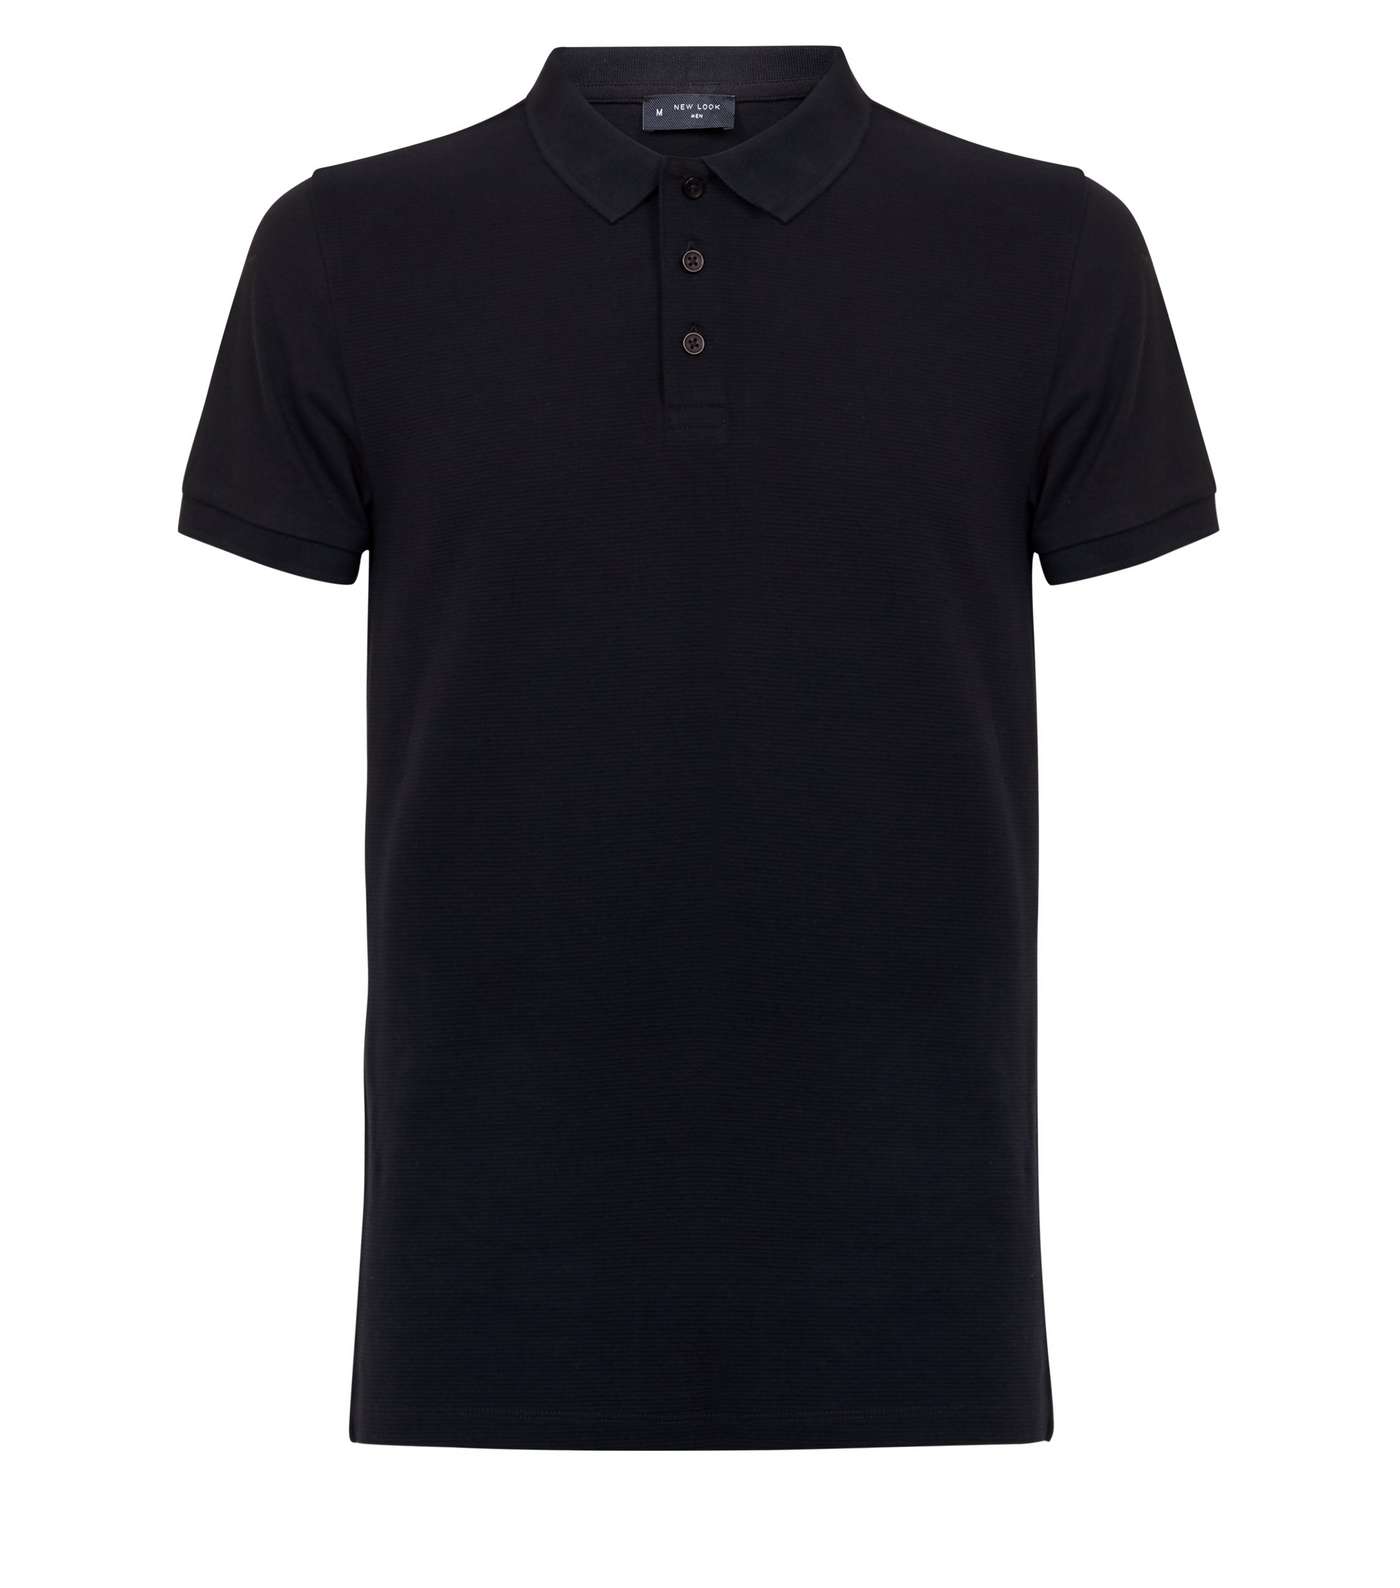 Navy Muscle Fit Textured Polo Shirt Image 4